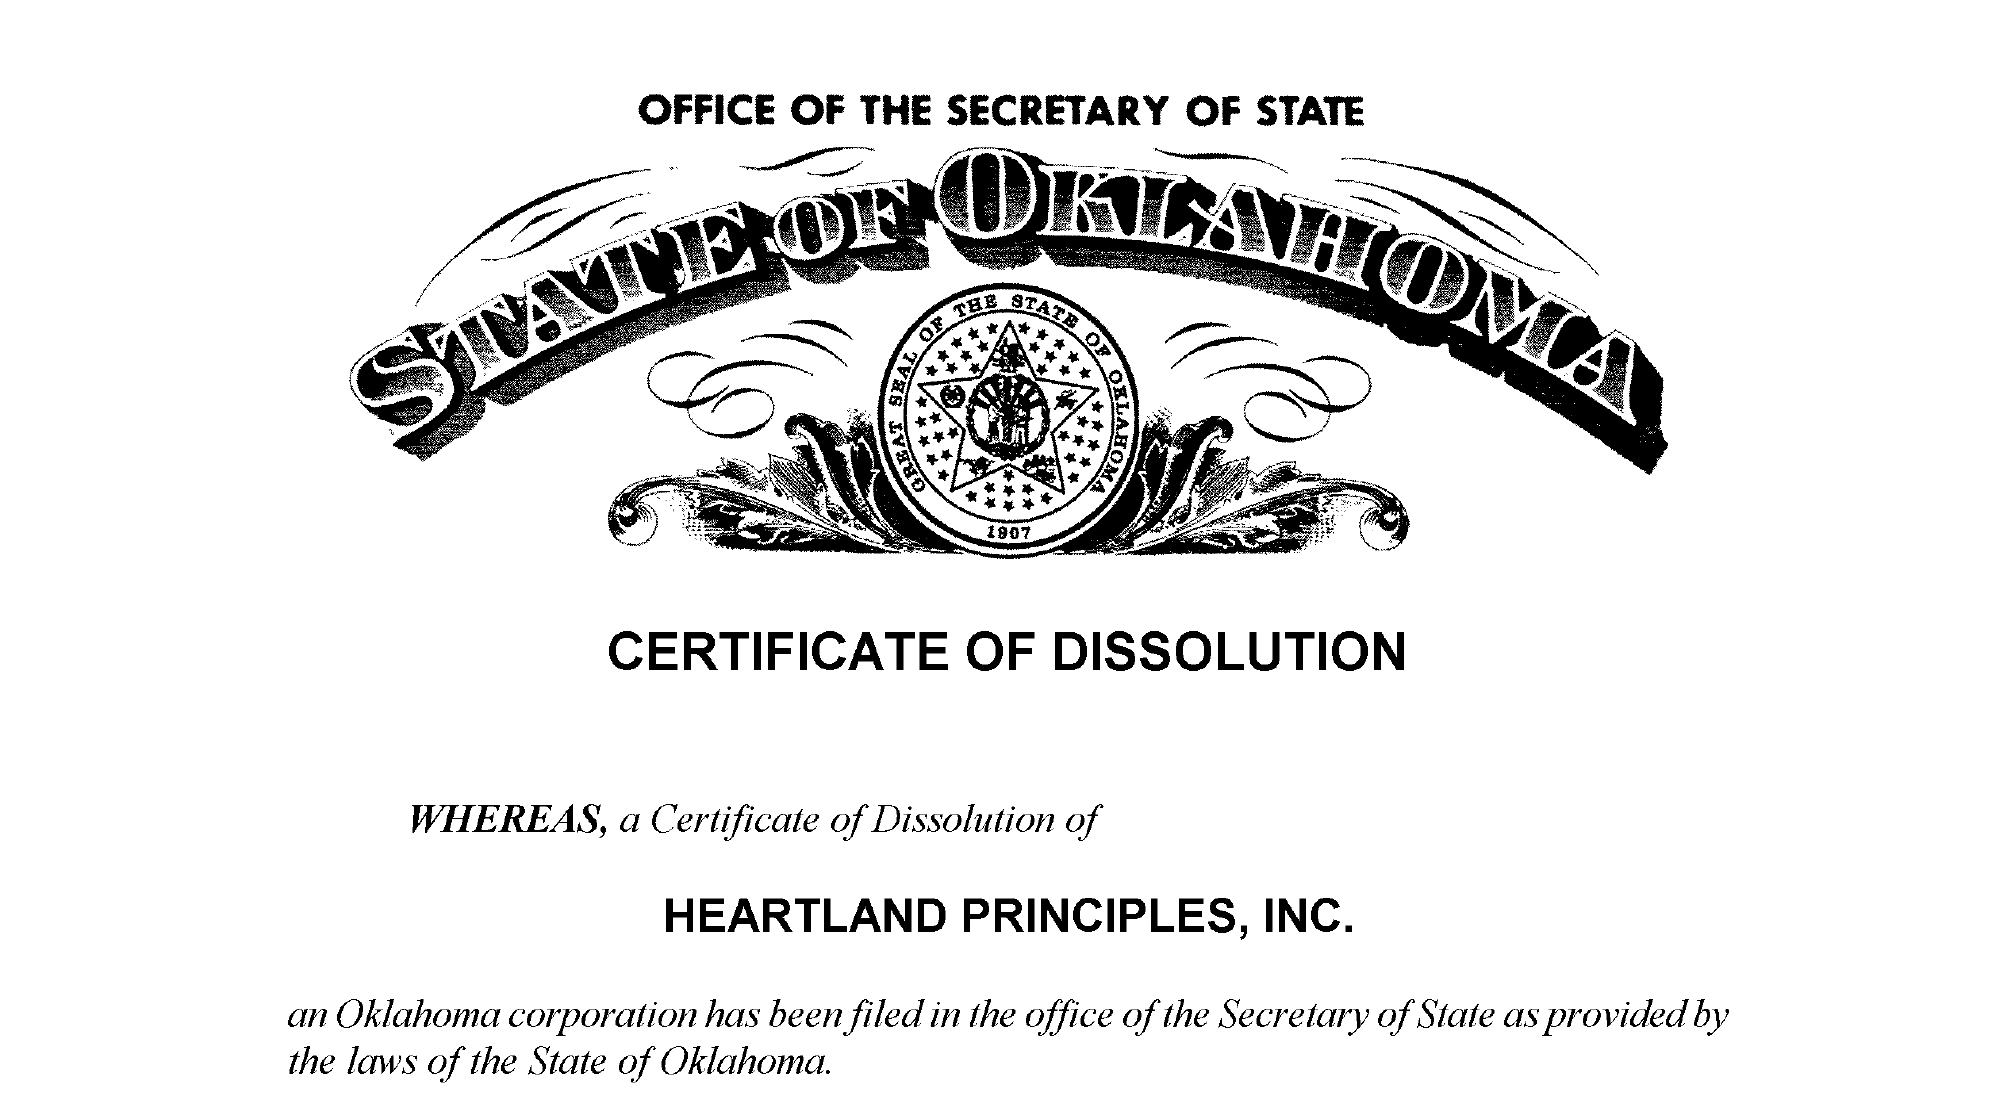 Certificate of dissolution